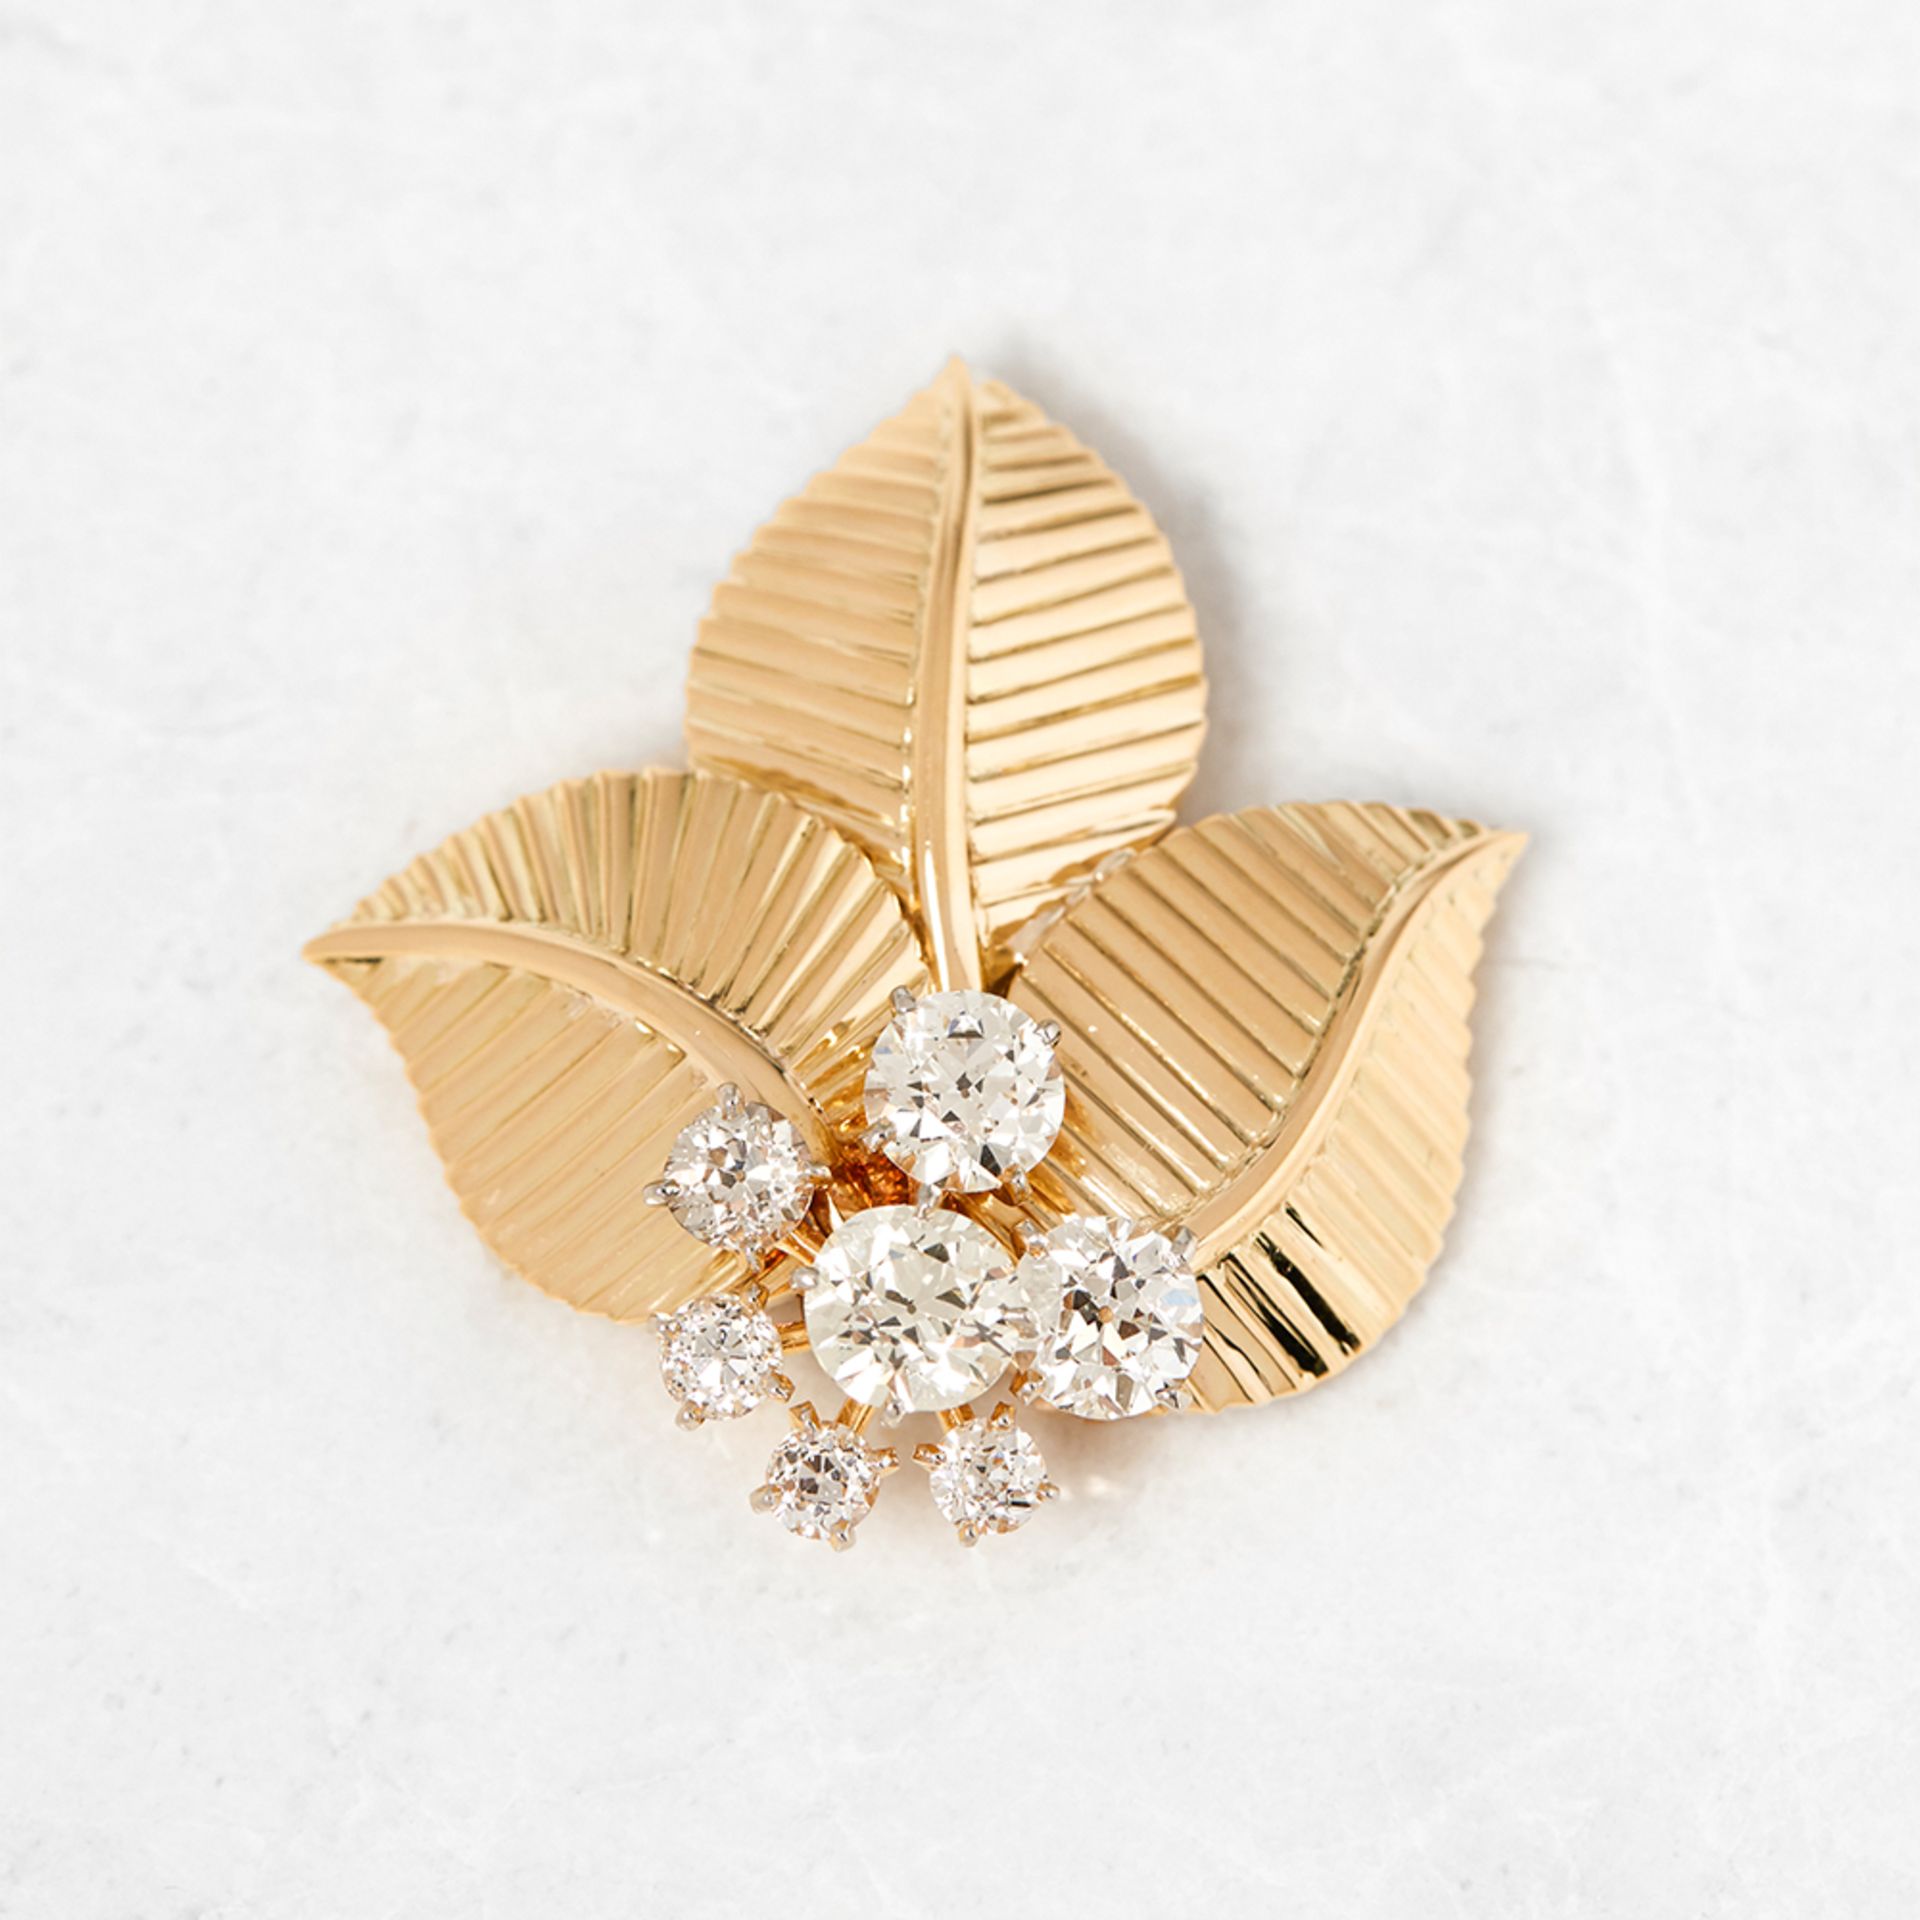 Cartier 18k Yellow Gold Diamond Vintage Leaf Brooch with Presentation Box - Image 5 of 16